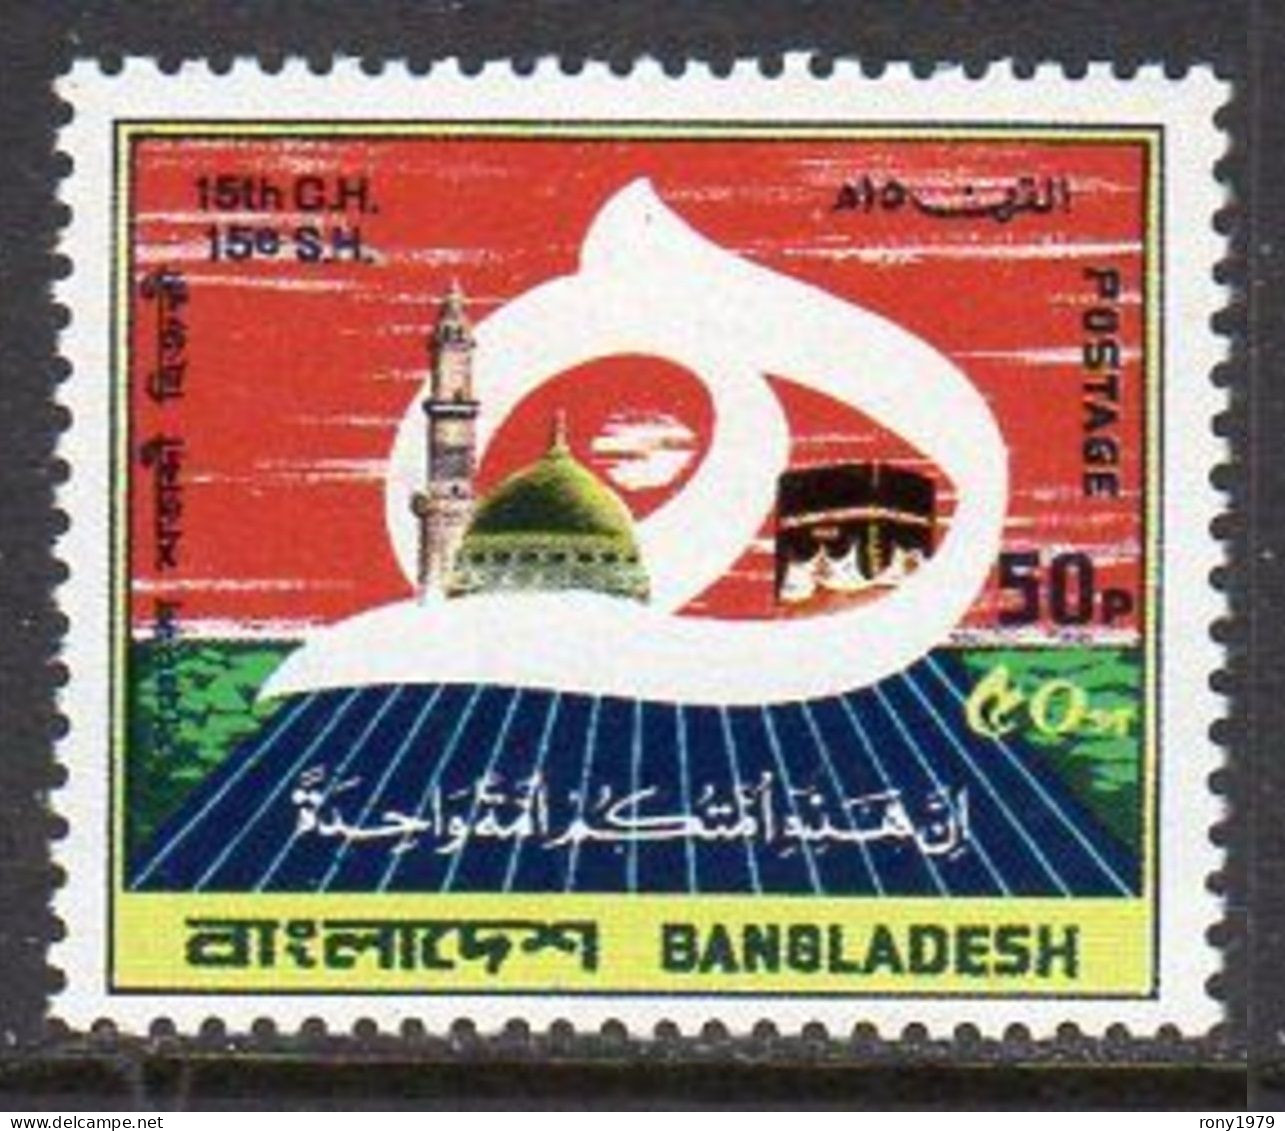 1980 BANGLADESH Year Set Pack Collection 13v+2 MS Rotary Palestine Mosque People Tourism Beach Exhibition Women Horse